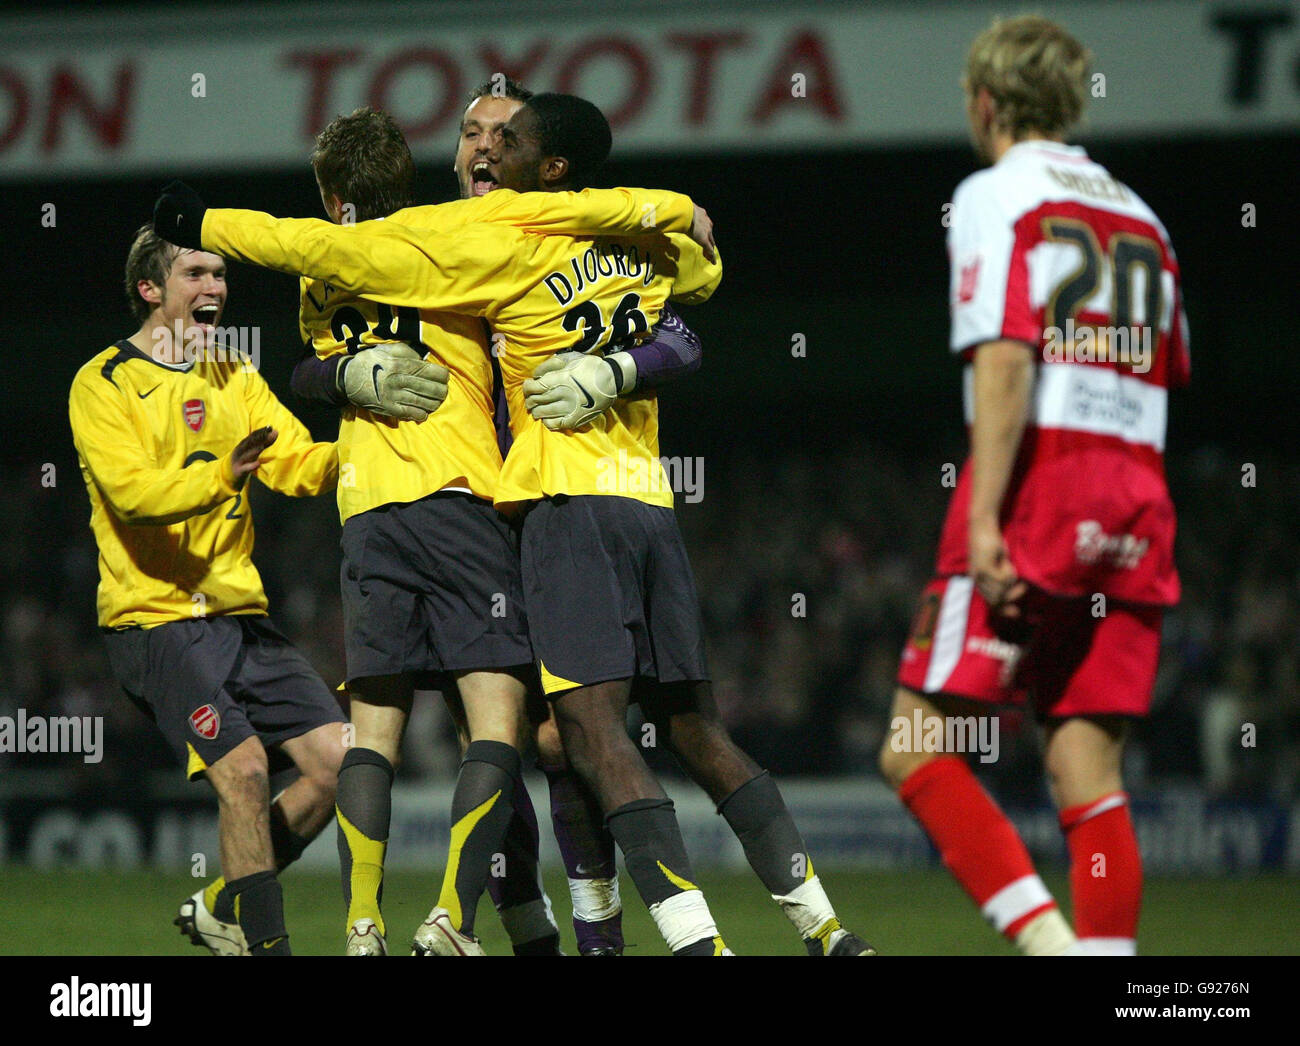 Arsenal goalkeeper Manuel Almunia celebrates with team-mates as Doncaster Rovers' Paul Green (R) shows his dejection after he missed vital penalty in the shootout during the Carling Cup quarter-final match at Belle Vue, Doncaster, Wednesday December 21, 2005. PRESS ASSOCIATION Photo. Photo credit should read: Nick Potts/PA. Stock Photo